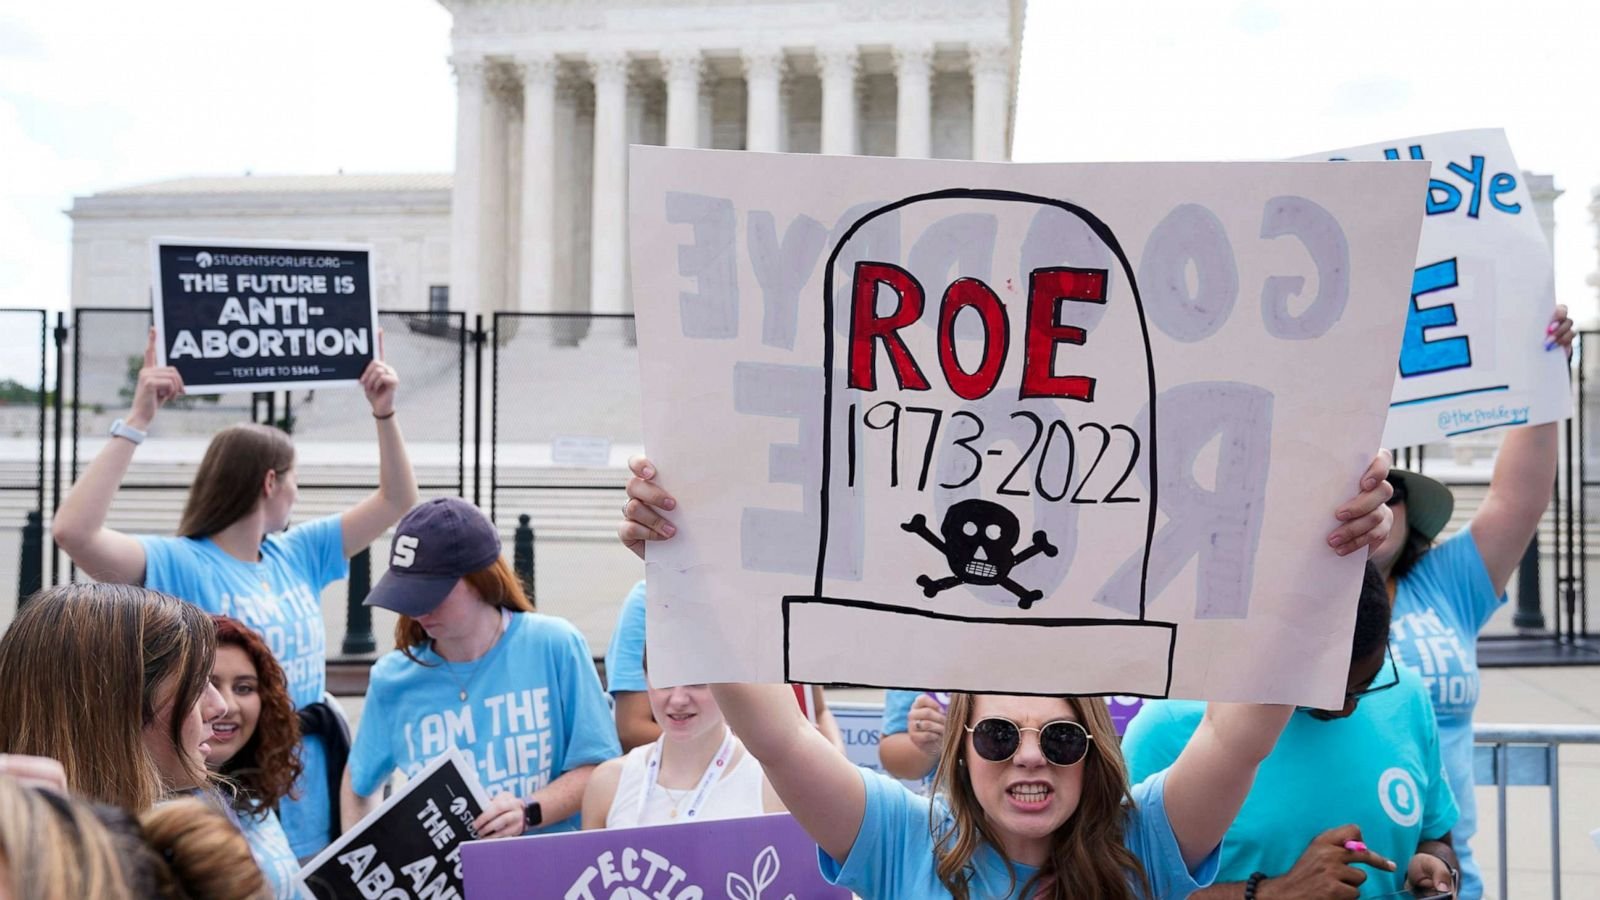 States introduce new abortion laws after Supreme Court overturns Roe v. Wade